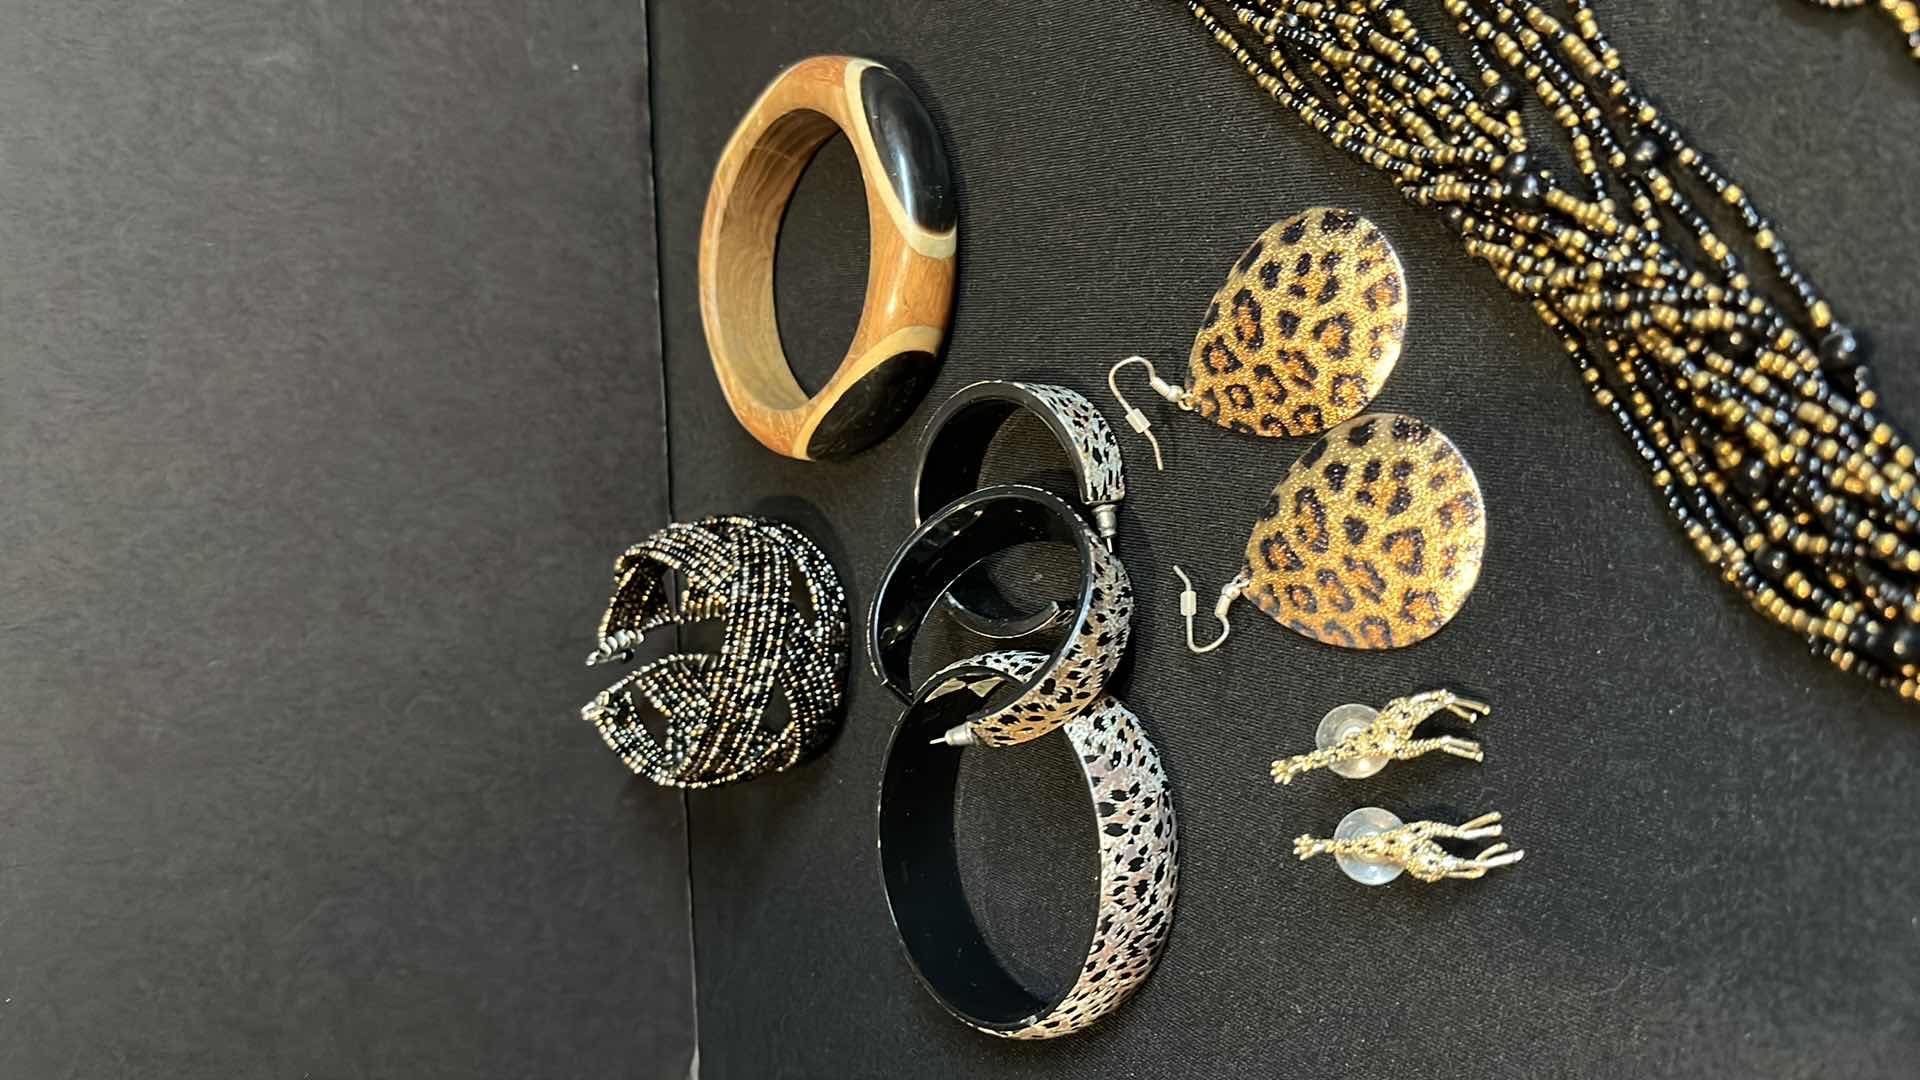 Photo 6 of LEOPARD THEMED COSTUME JEWELRY AND HANGING JEWELRY ORGANIZER